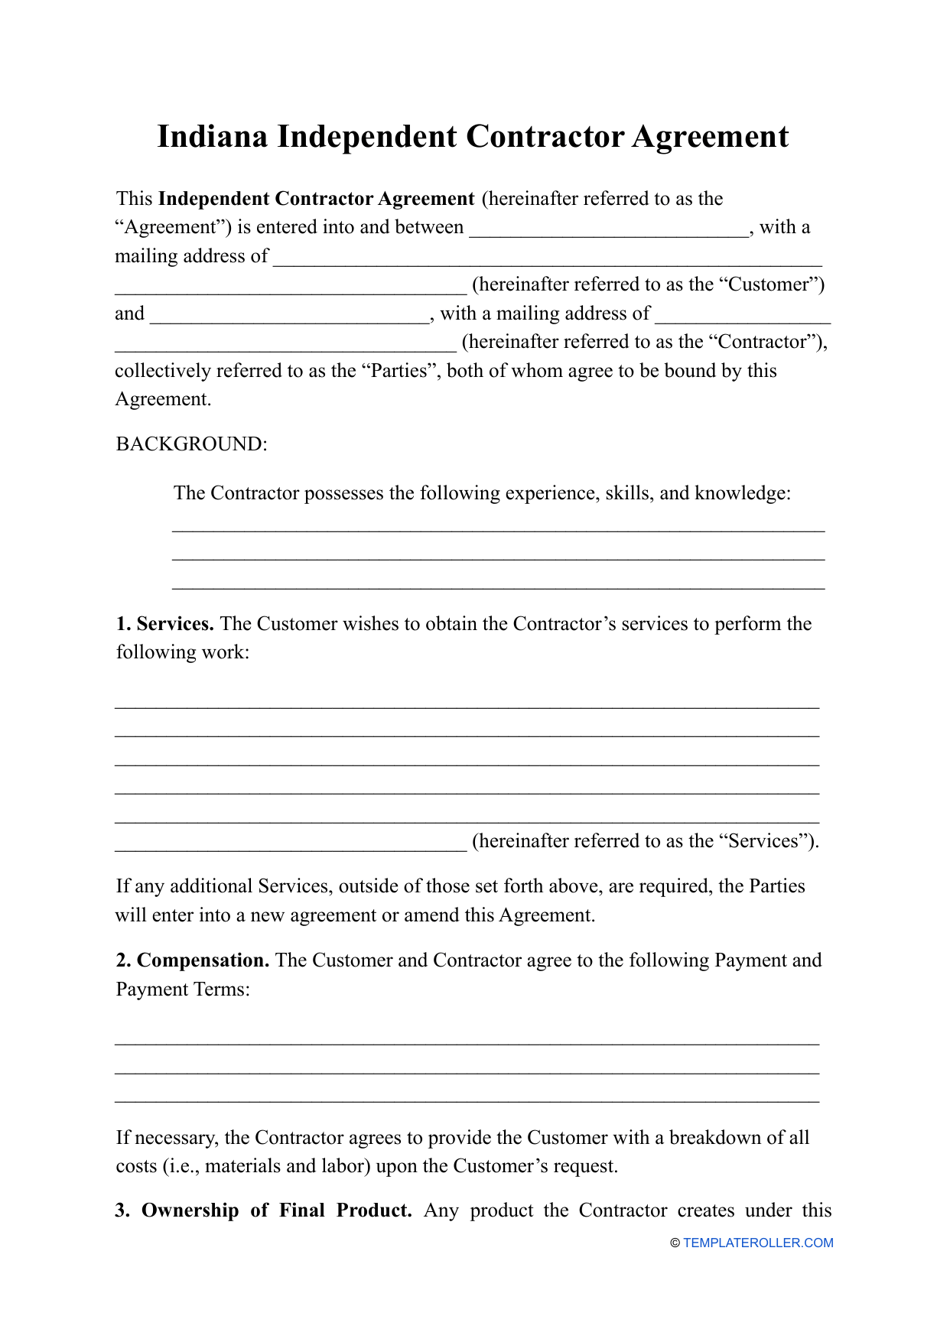 Independent Contractor Agreement Template - Indiana, Page 1